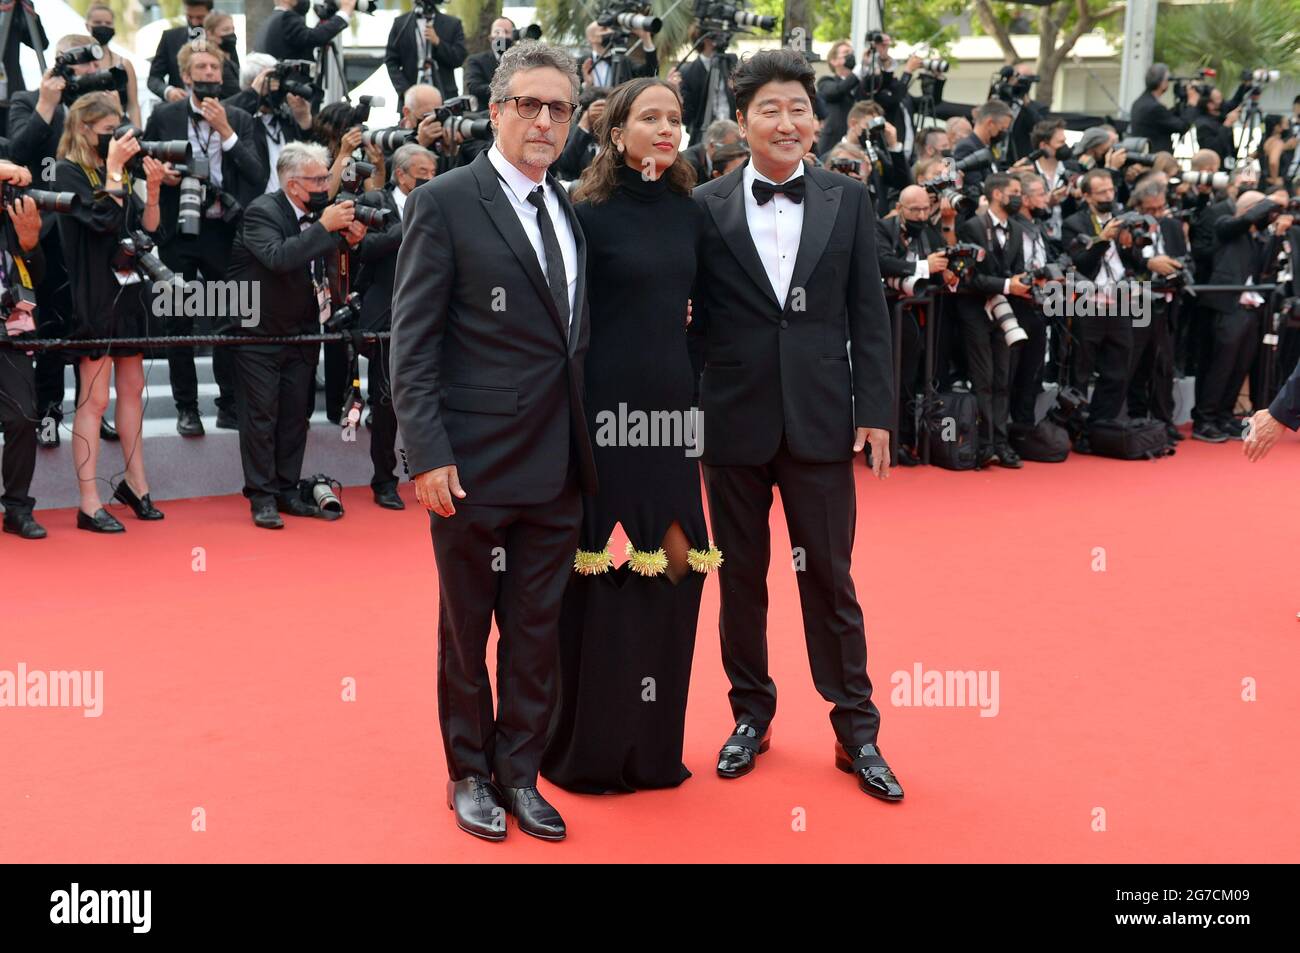 Cannes, France. 12th July, 2021. Jury members Song Kang-ho, Mati Diop and Kleber Mendona Filho attend the screening of the film 'The French Dispatch' during the 74th Annual Cannes Film Festival at Palais des Festivals. Credit: Stefanie Rex/dpa-Zentralbild/dpa/Alamy Live News Stock Photo